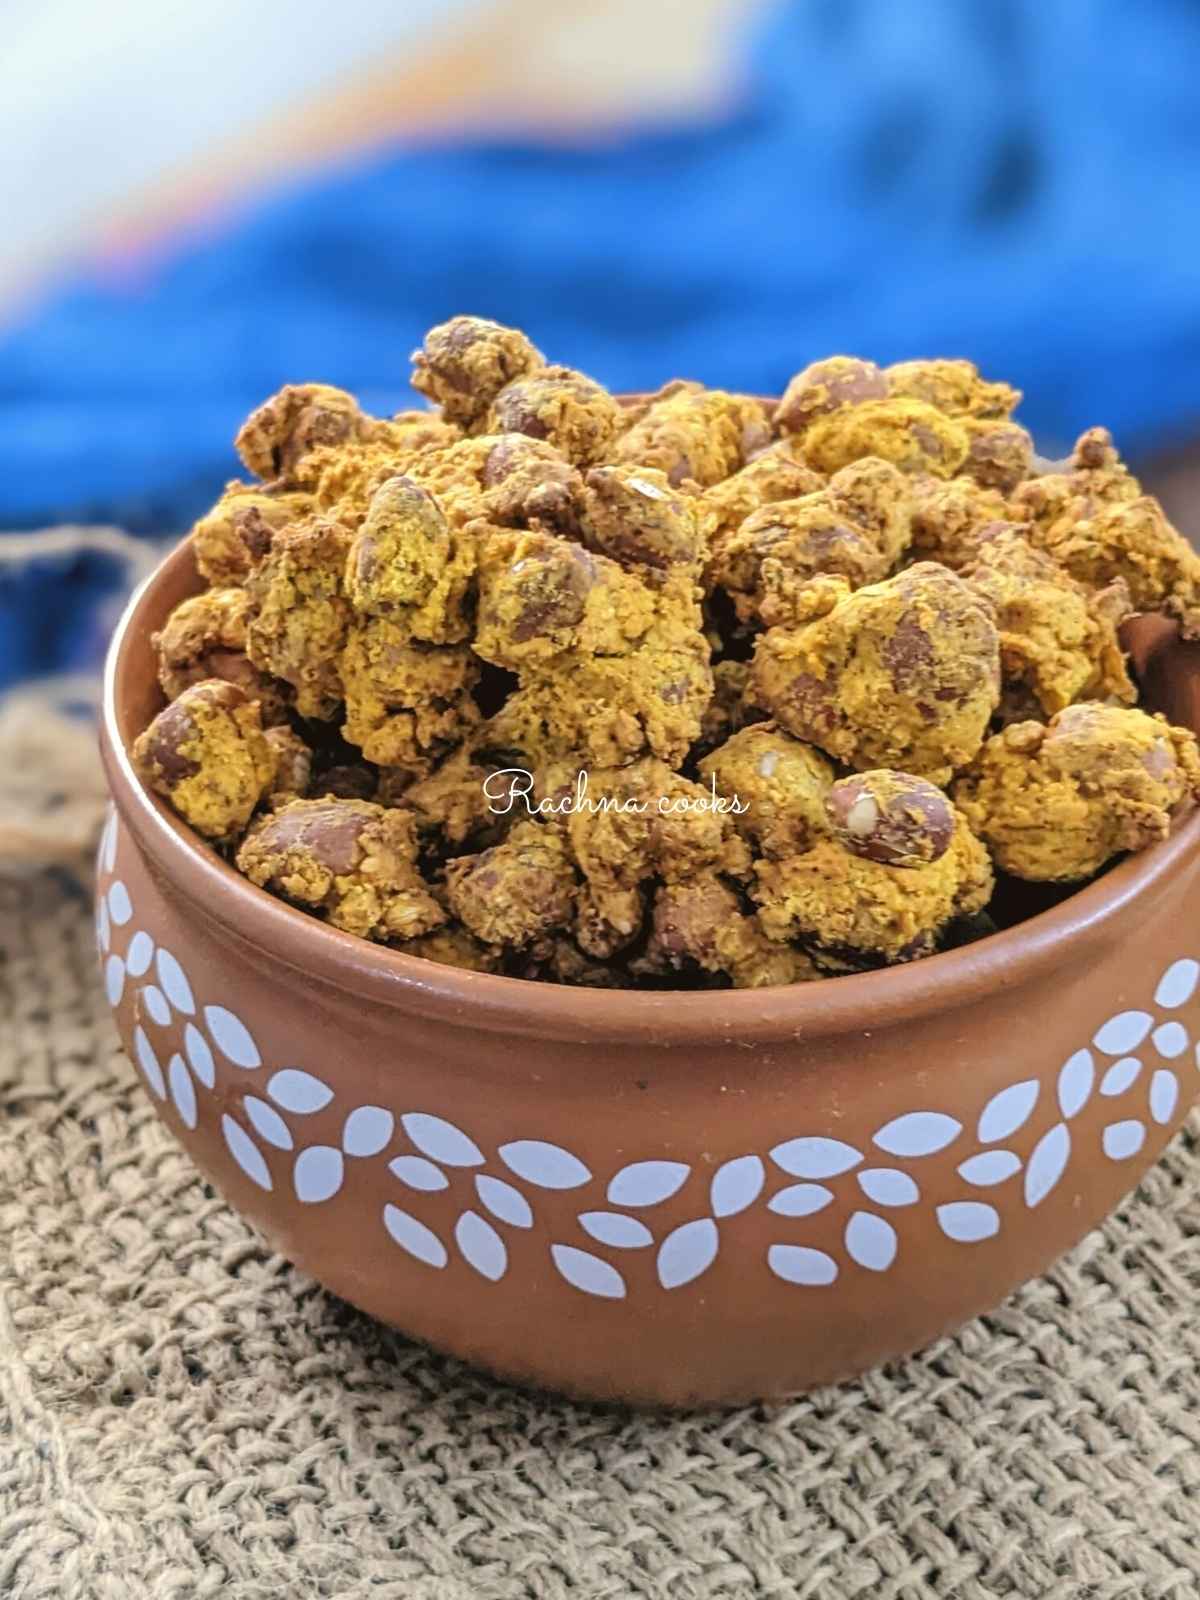 Masala peanuts in a brown ceramic bowl on a brown blue background.